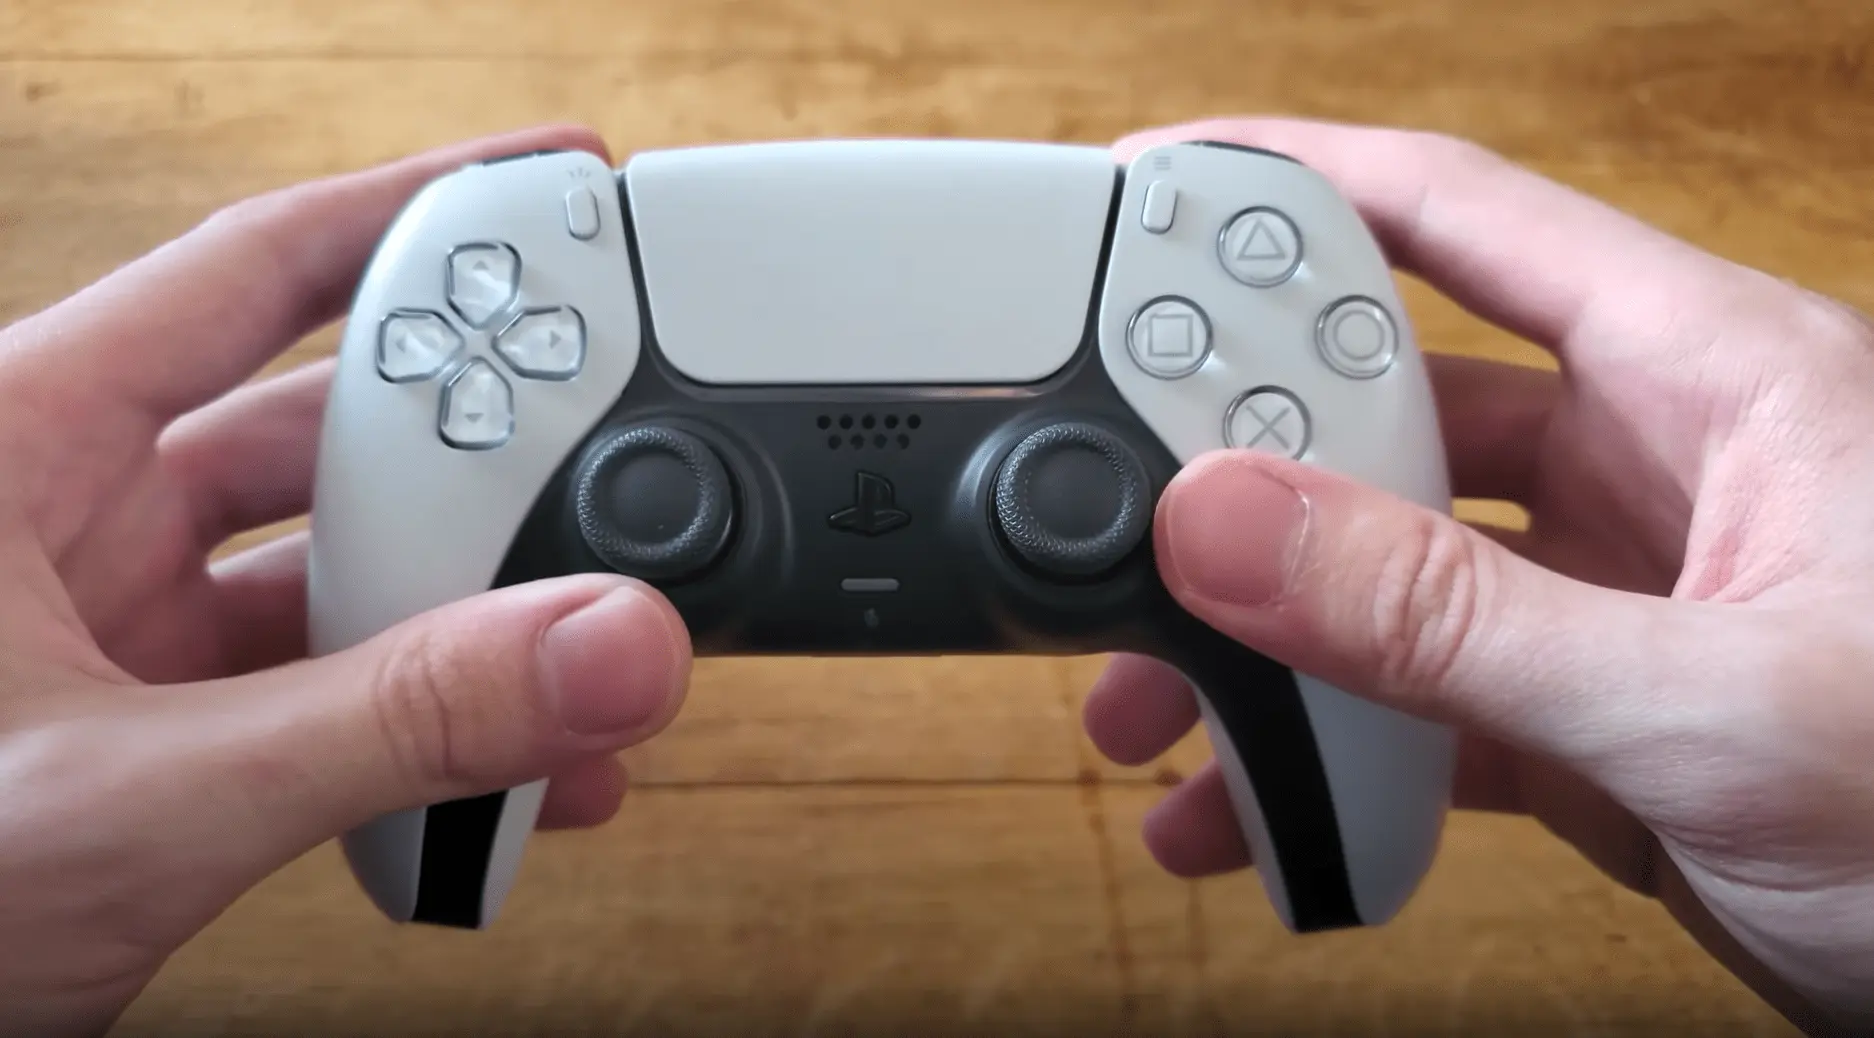 How to fix Sticky/Stuck PS5 controller buttons